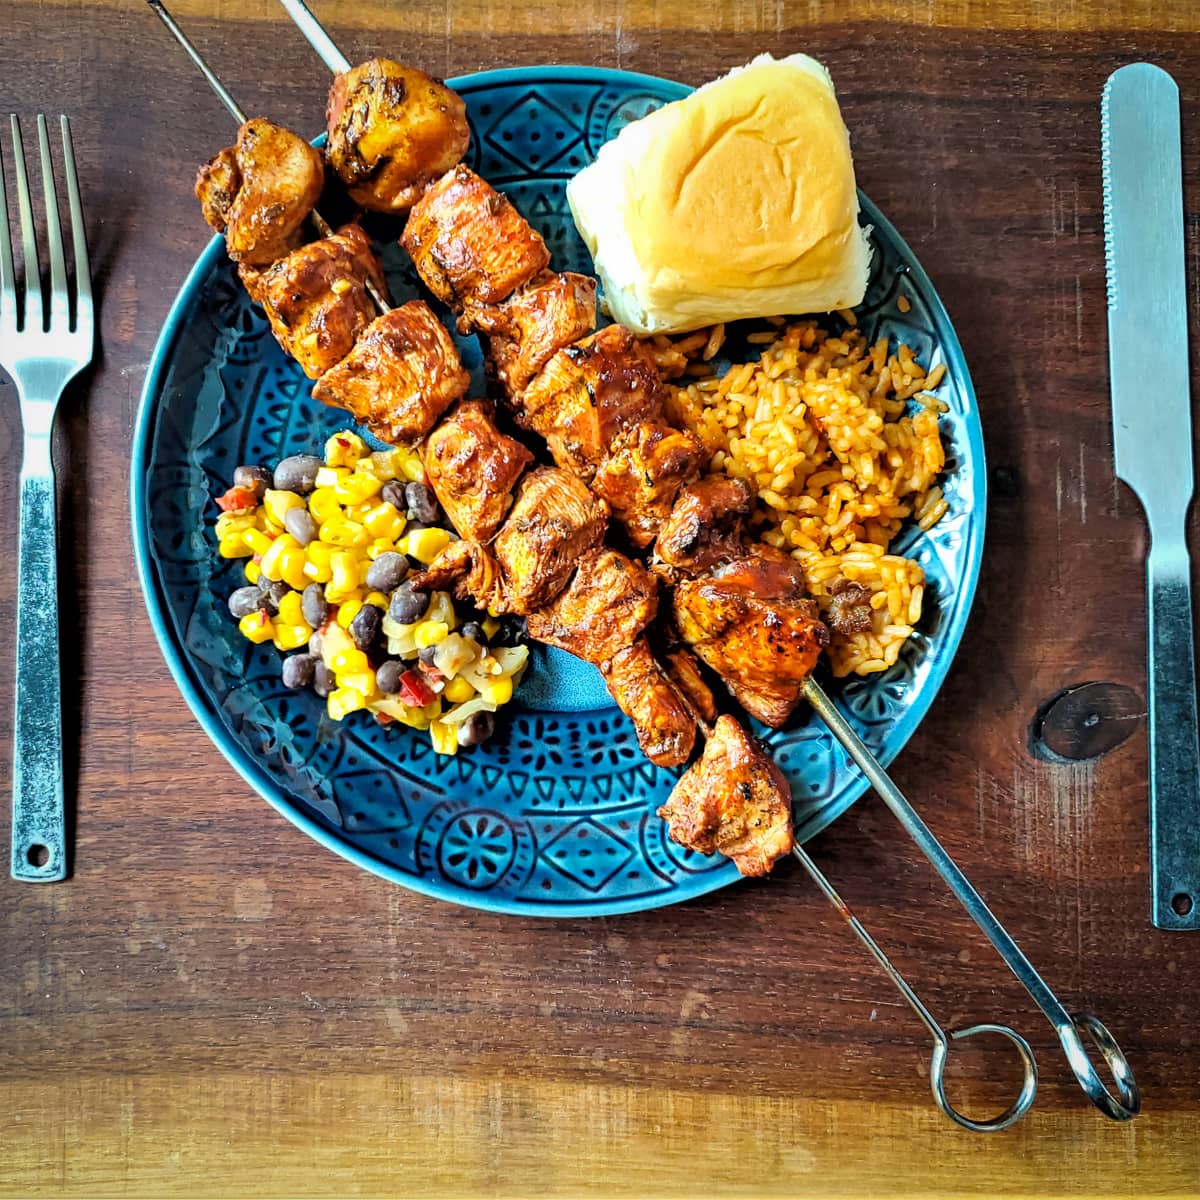 Plate of Peruvian Chicken anticuchos skewers with rice and veggies.